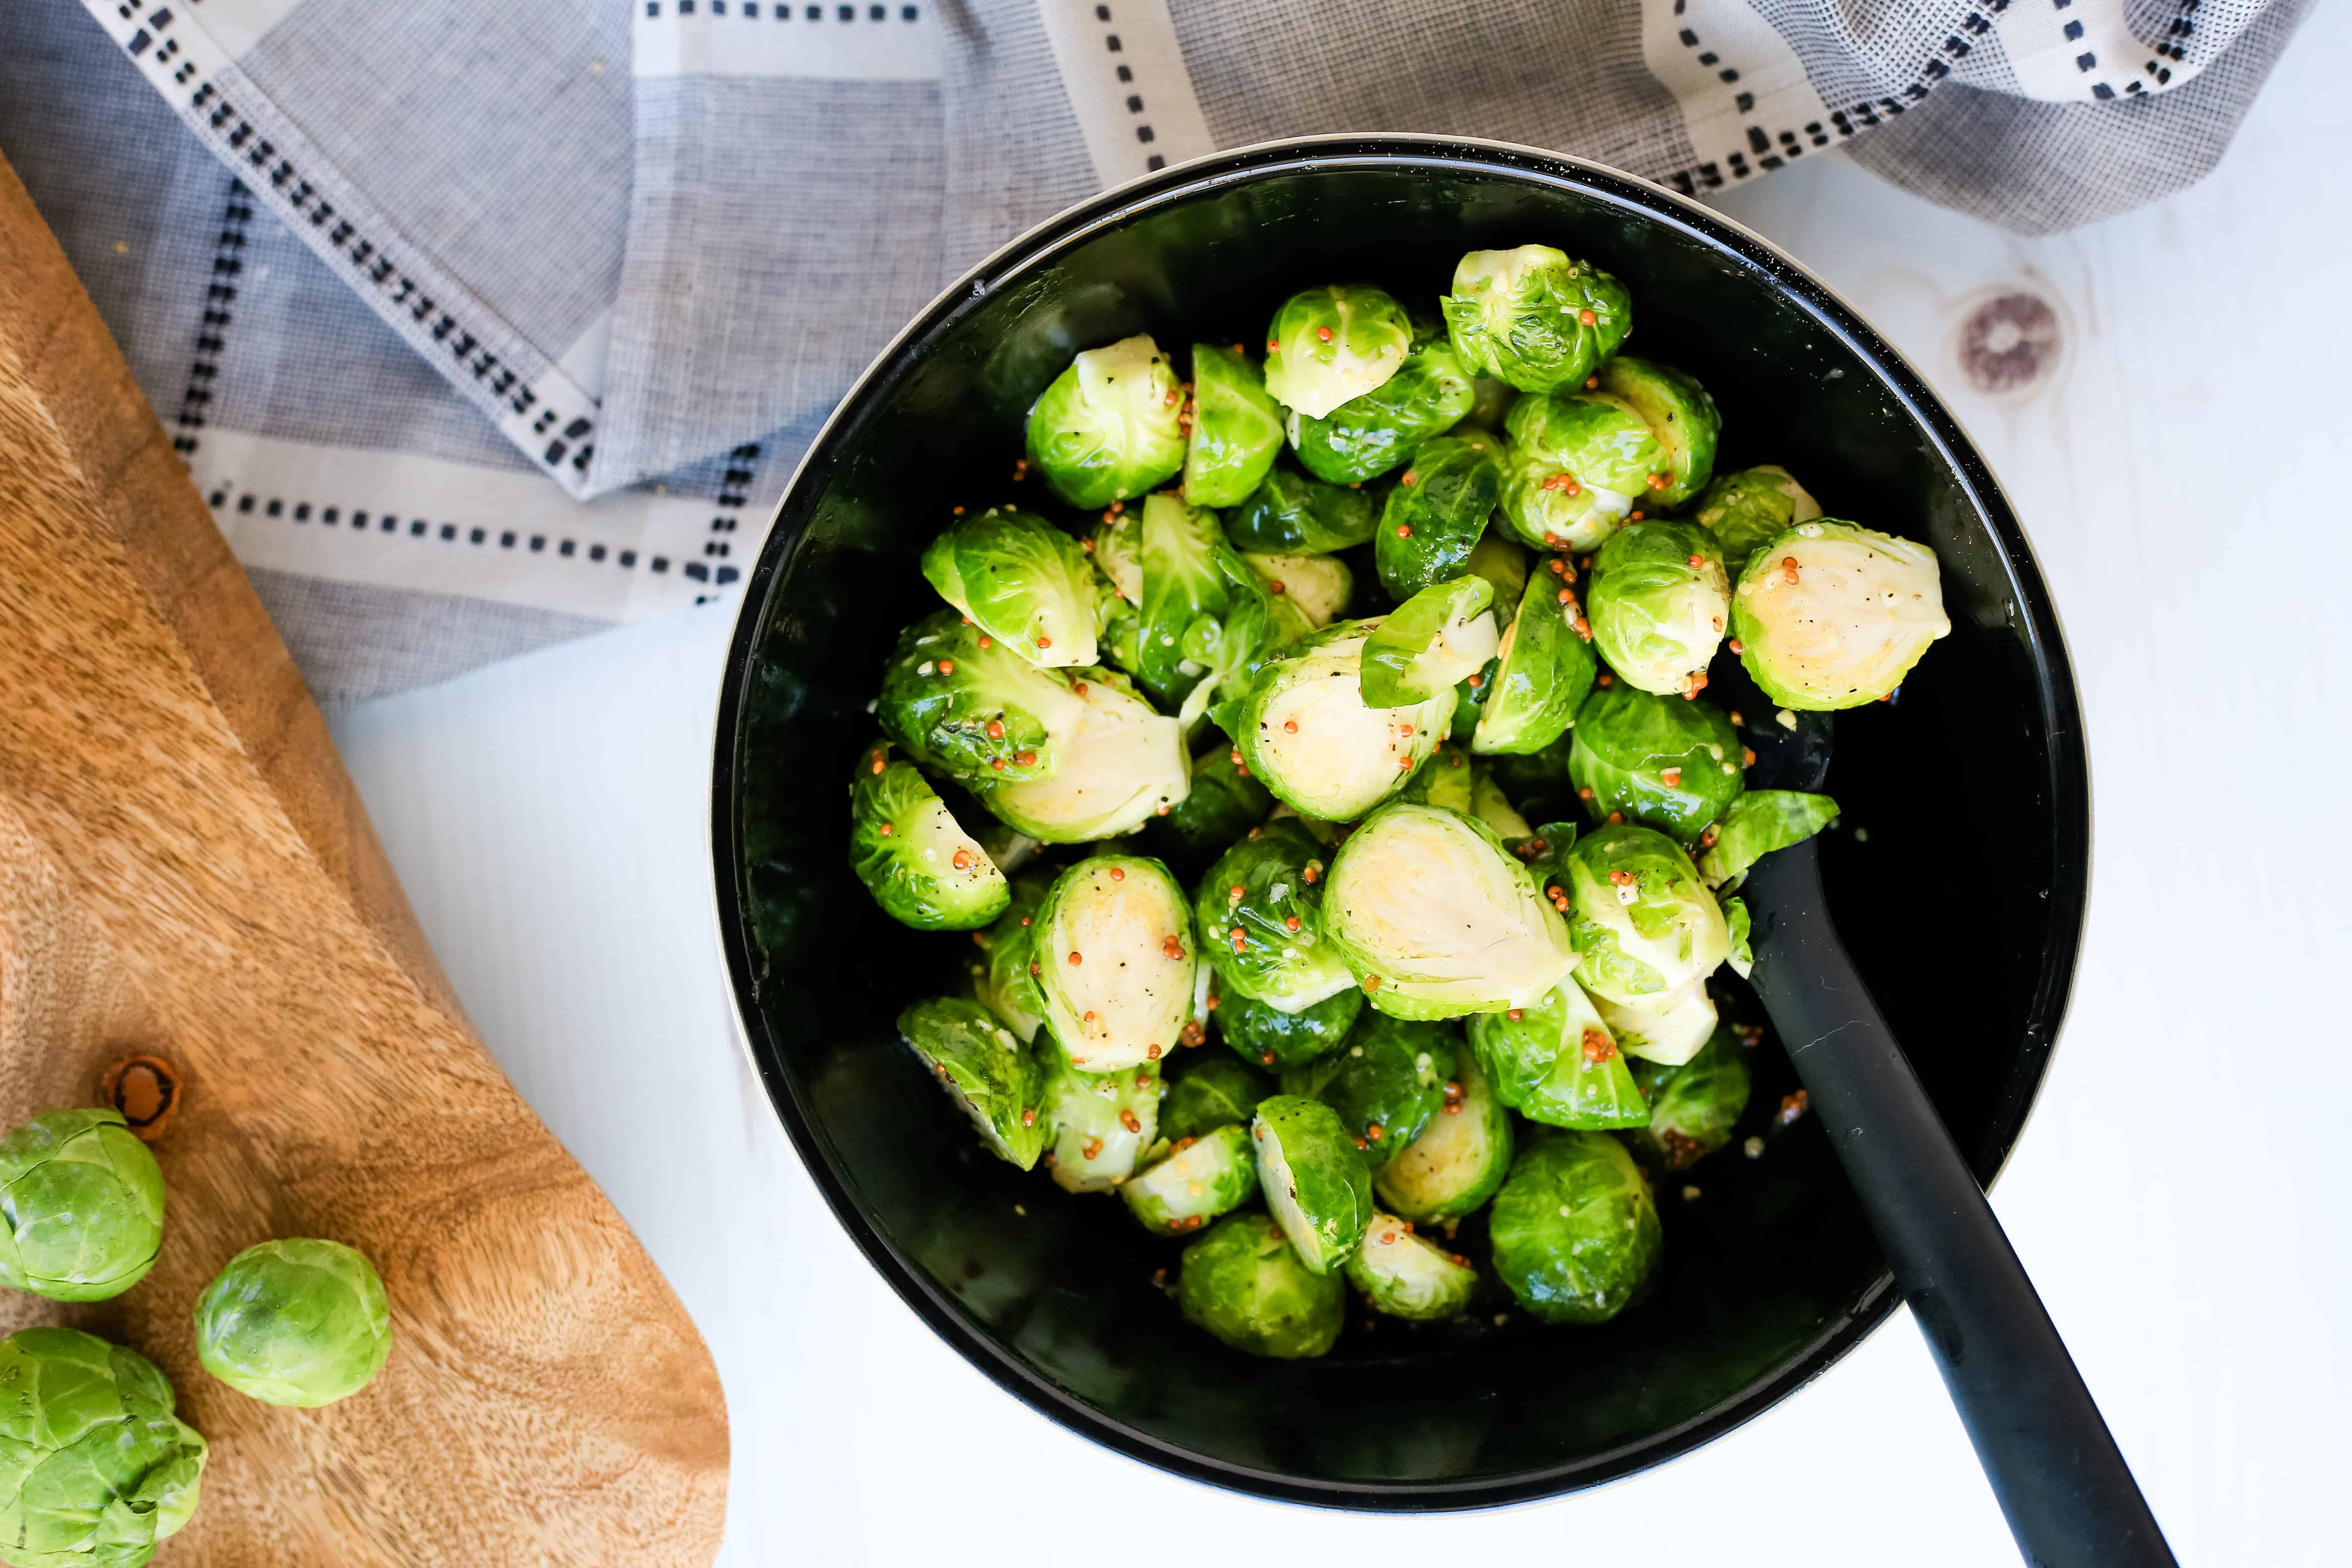 Maple Mustard Brussels Sprouts with Creamy Dijon Aioli | Honey mustard, move aside. You'll love these roasted Maple Mustard Brussels Sprouts with a Creamy Dijon Aioli. It's the perfect holiday side dish!